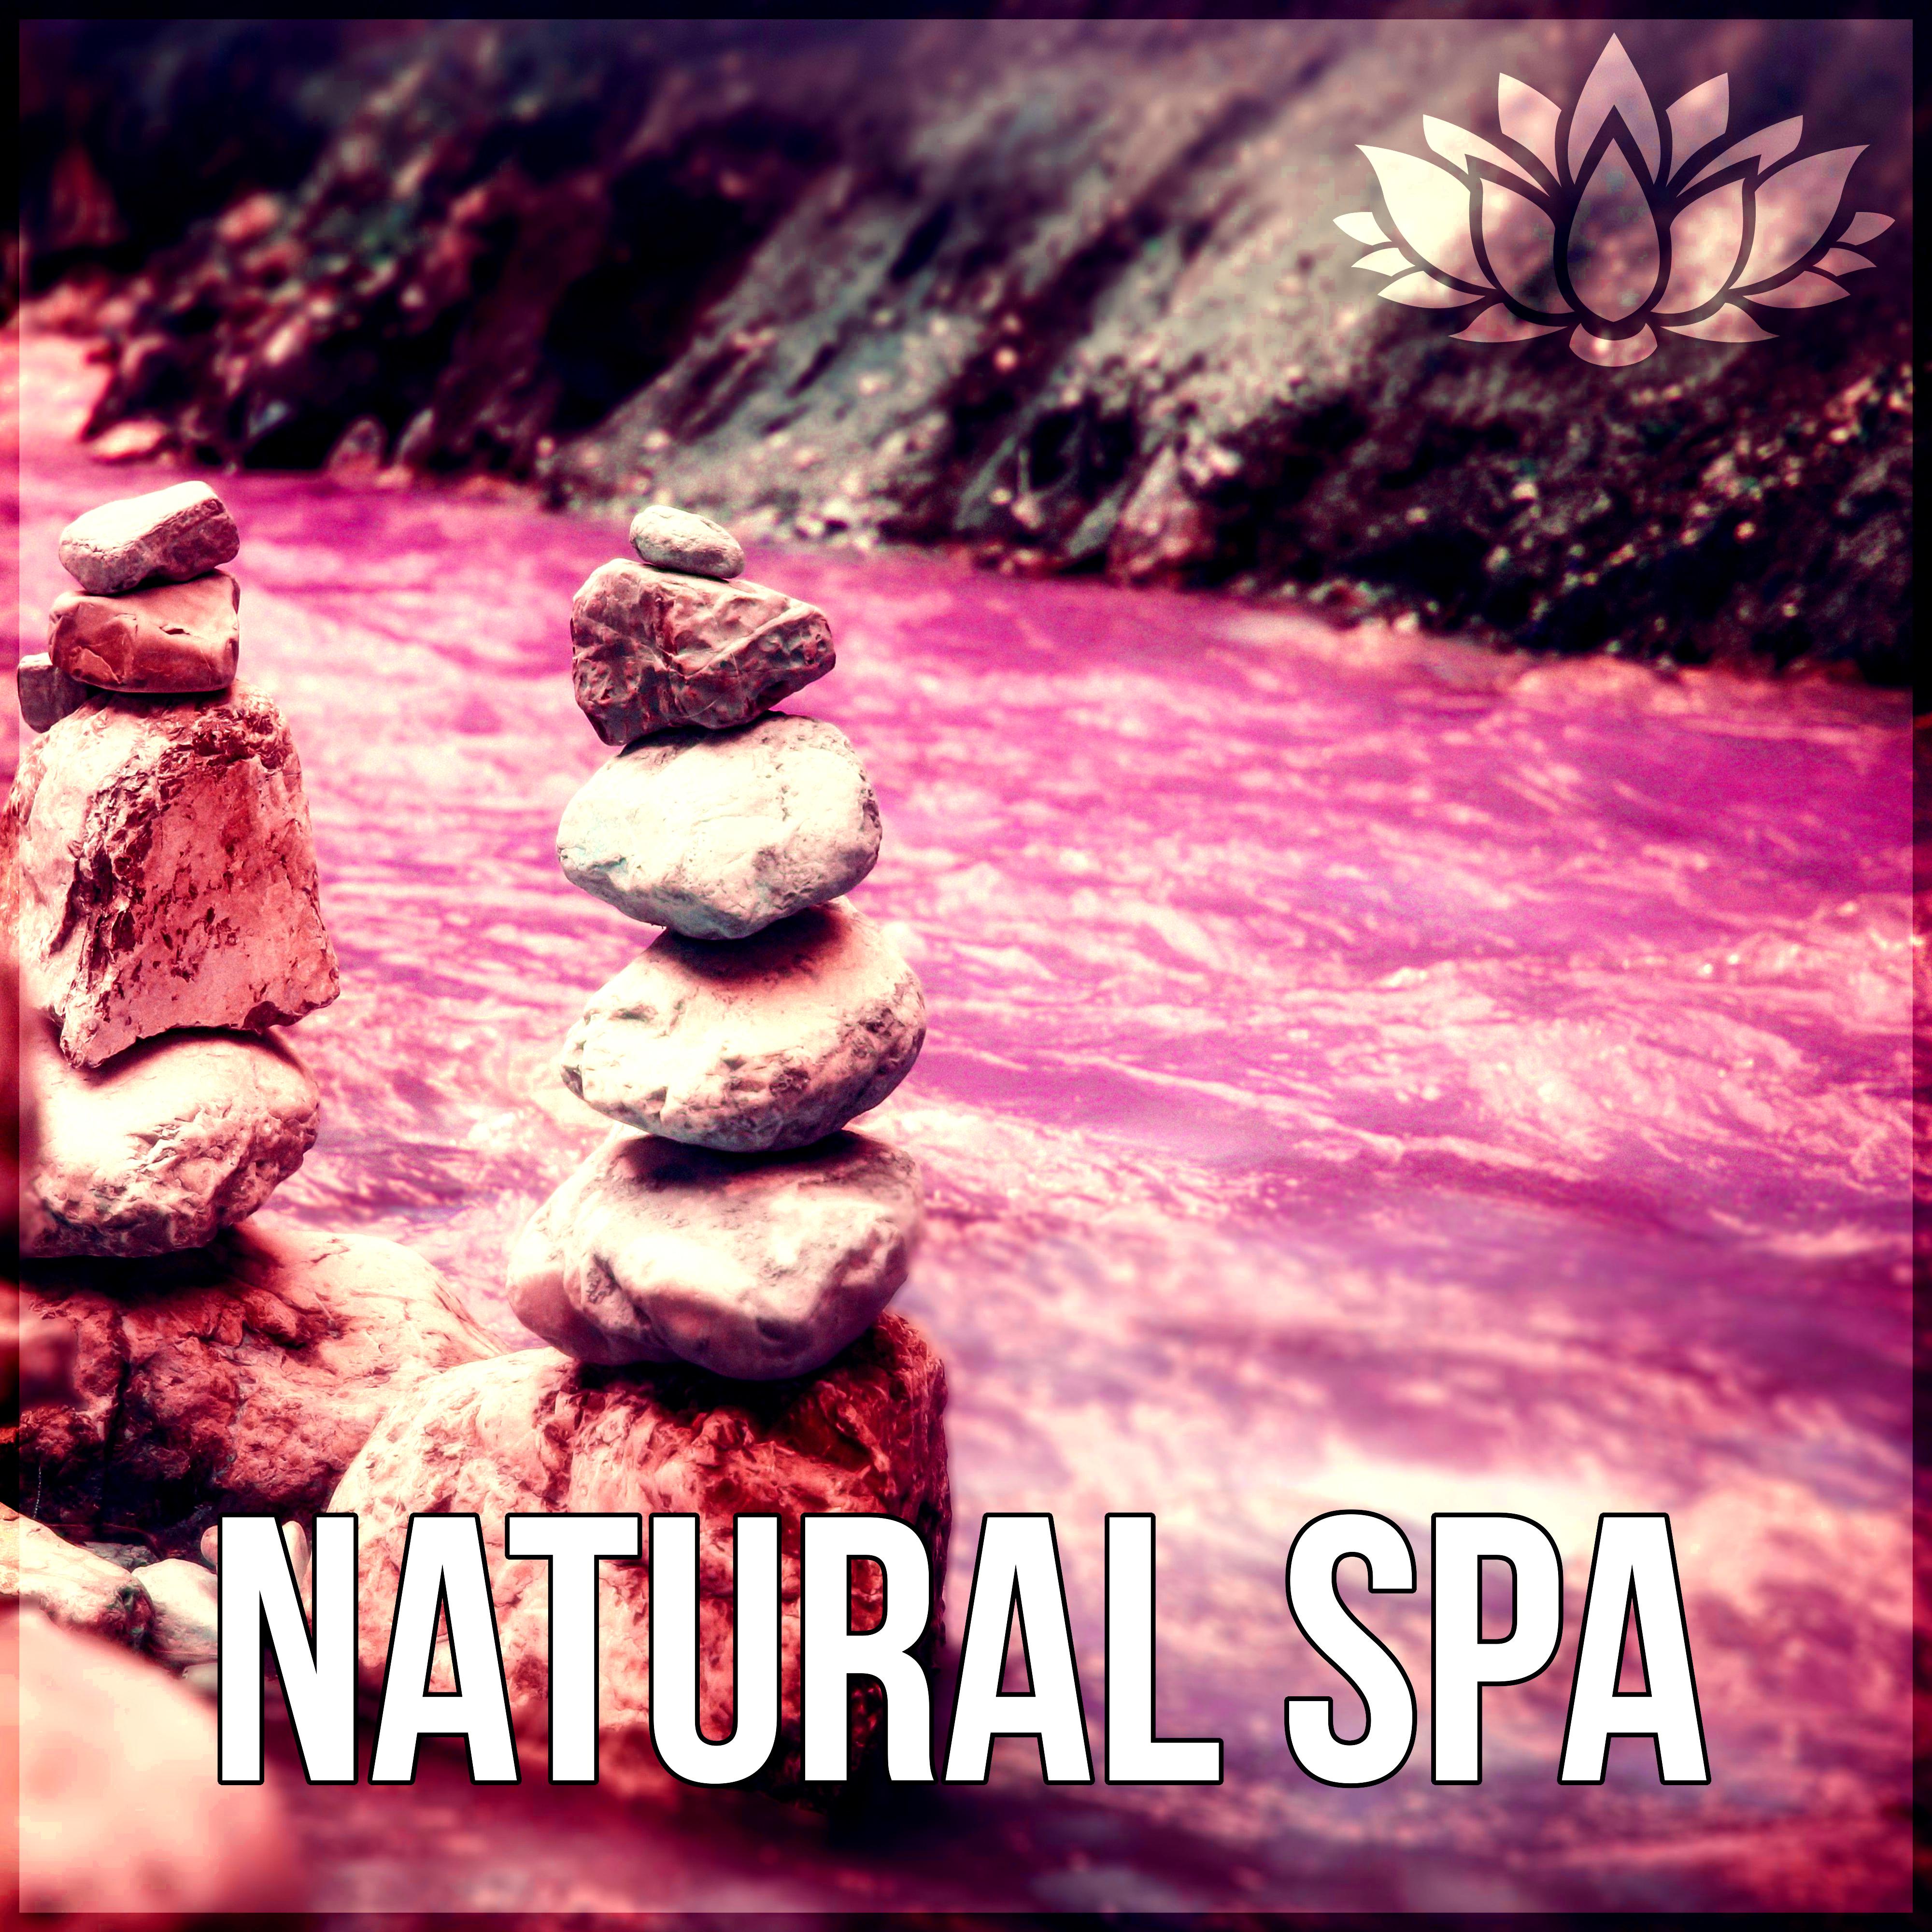 Natural Spa - Relaxation, Sounds of Nature, Healing Therapy, Massage Music, Spa Sounds, Peaceful Sounds